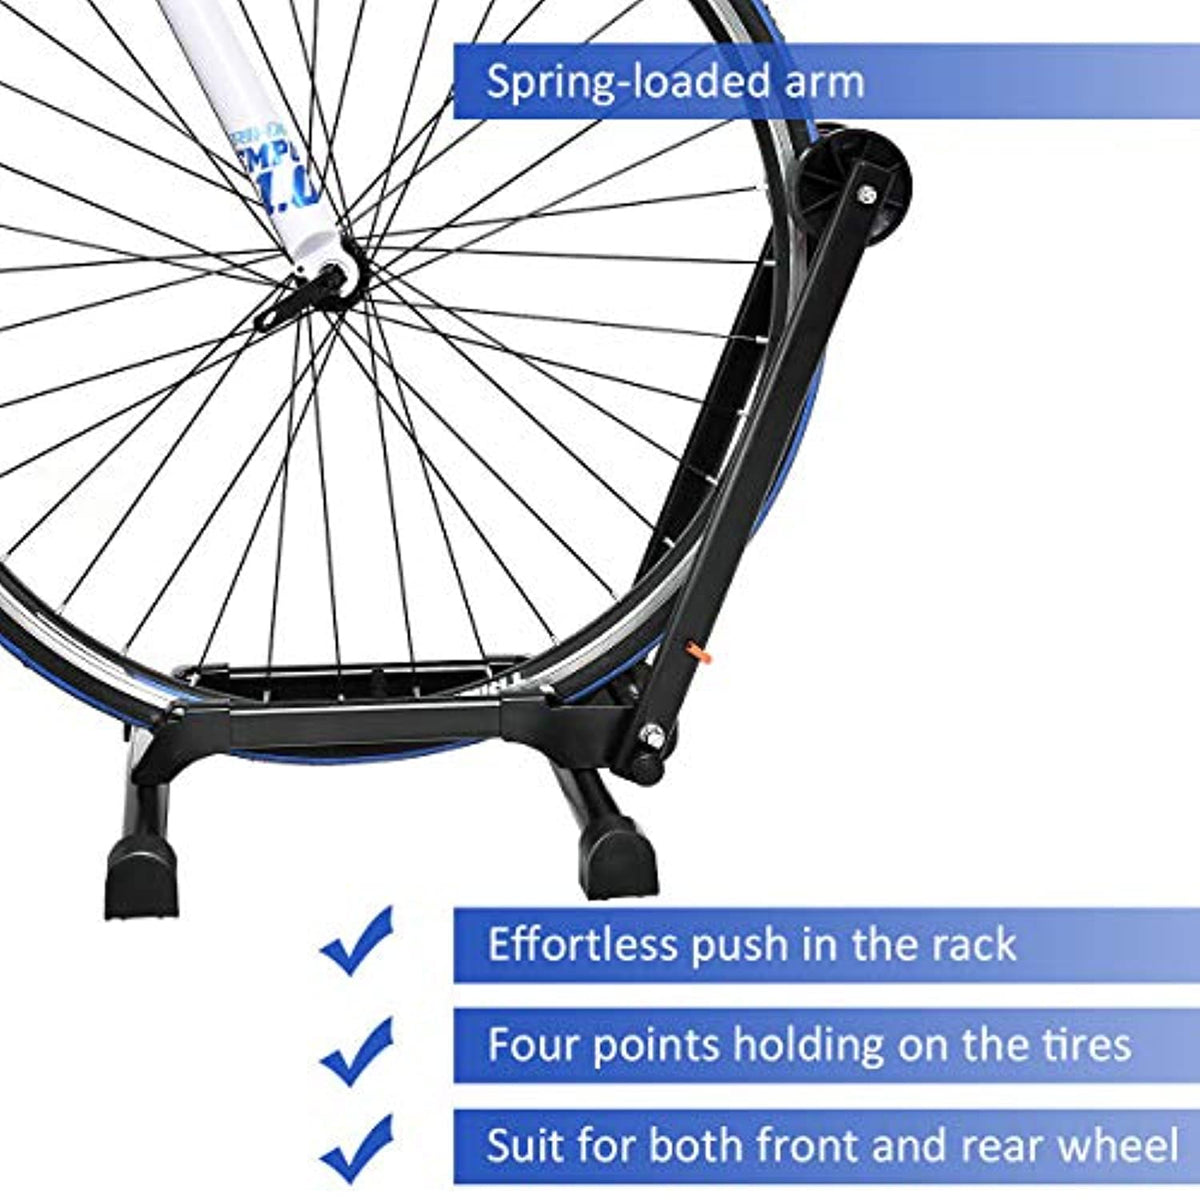 Features of Bike Stand